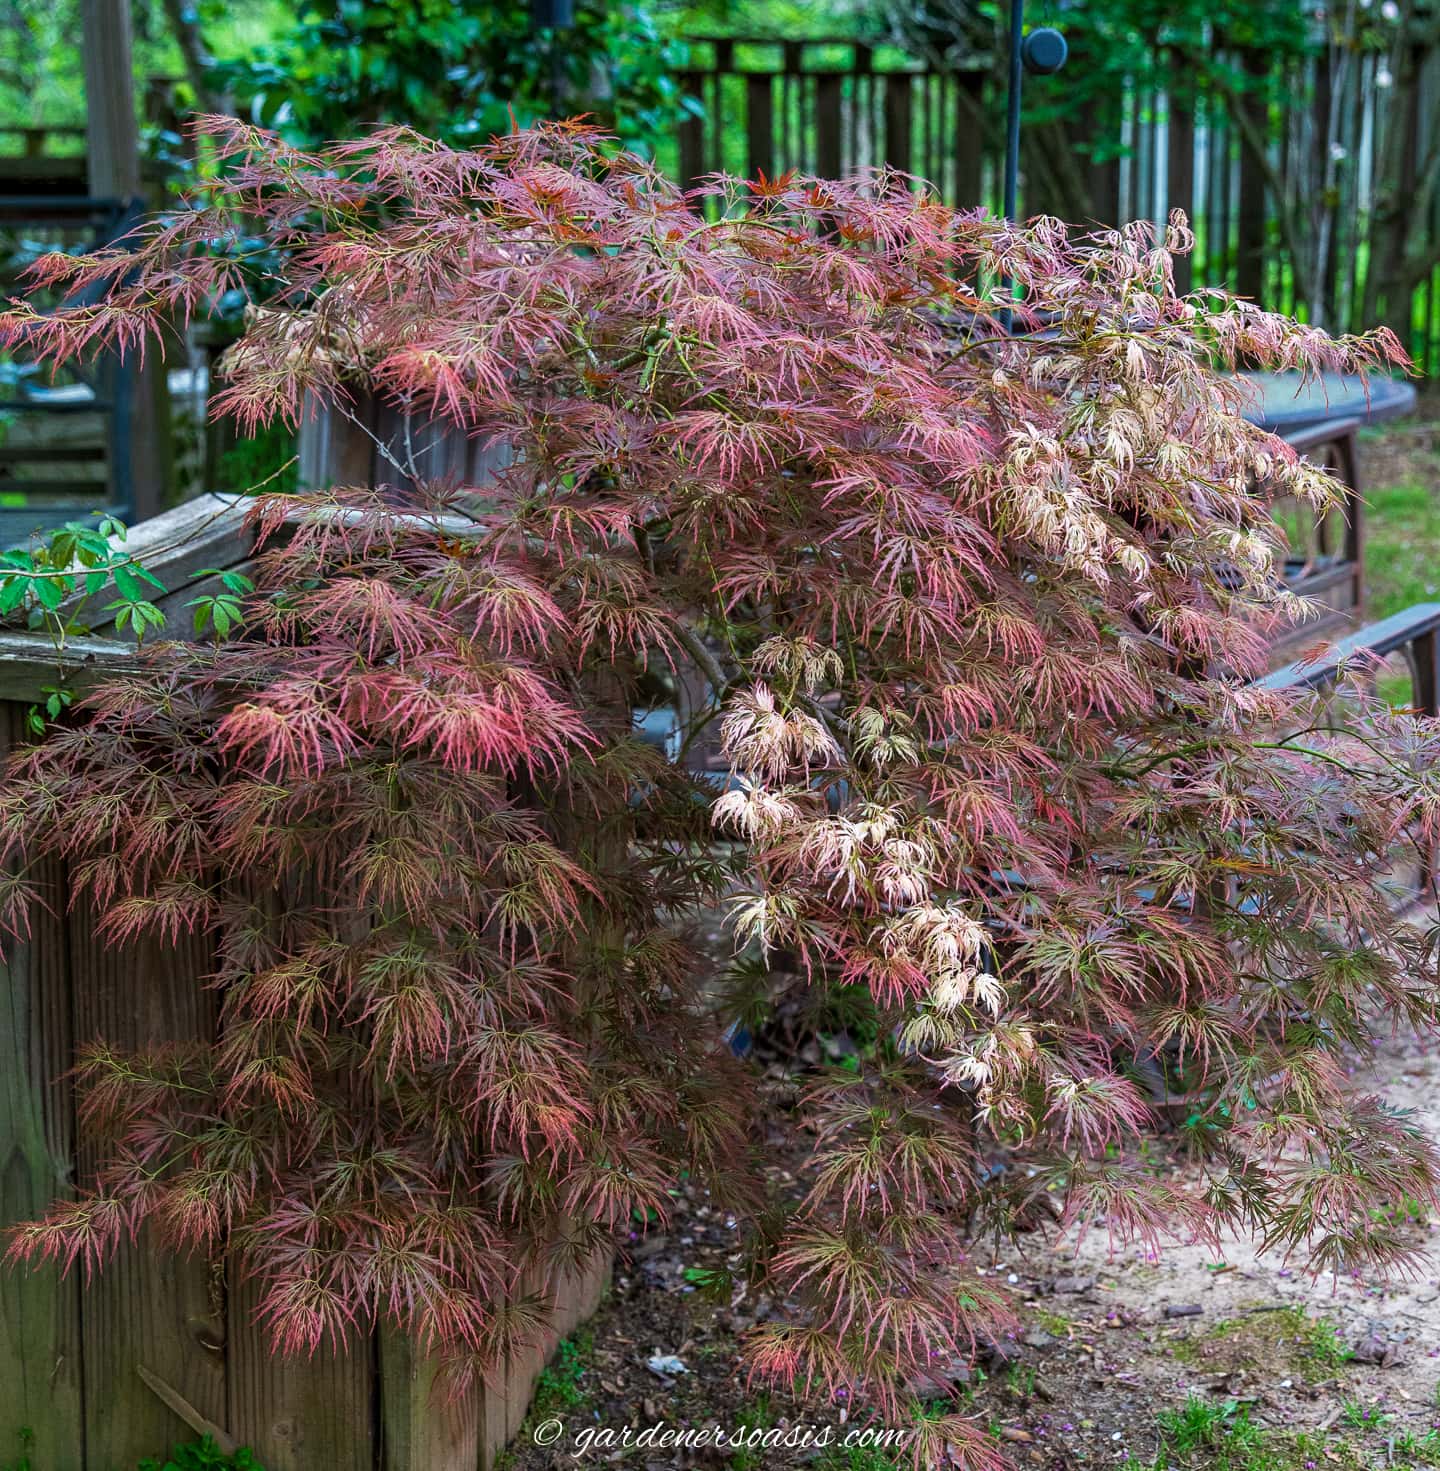 A Japanese maple tree with red leaves growing in a container